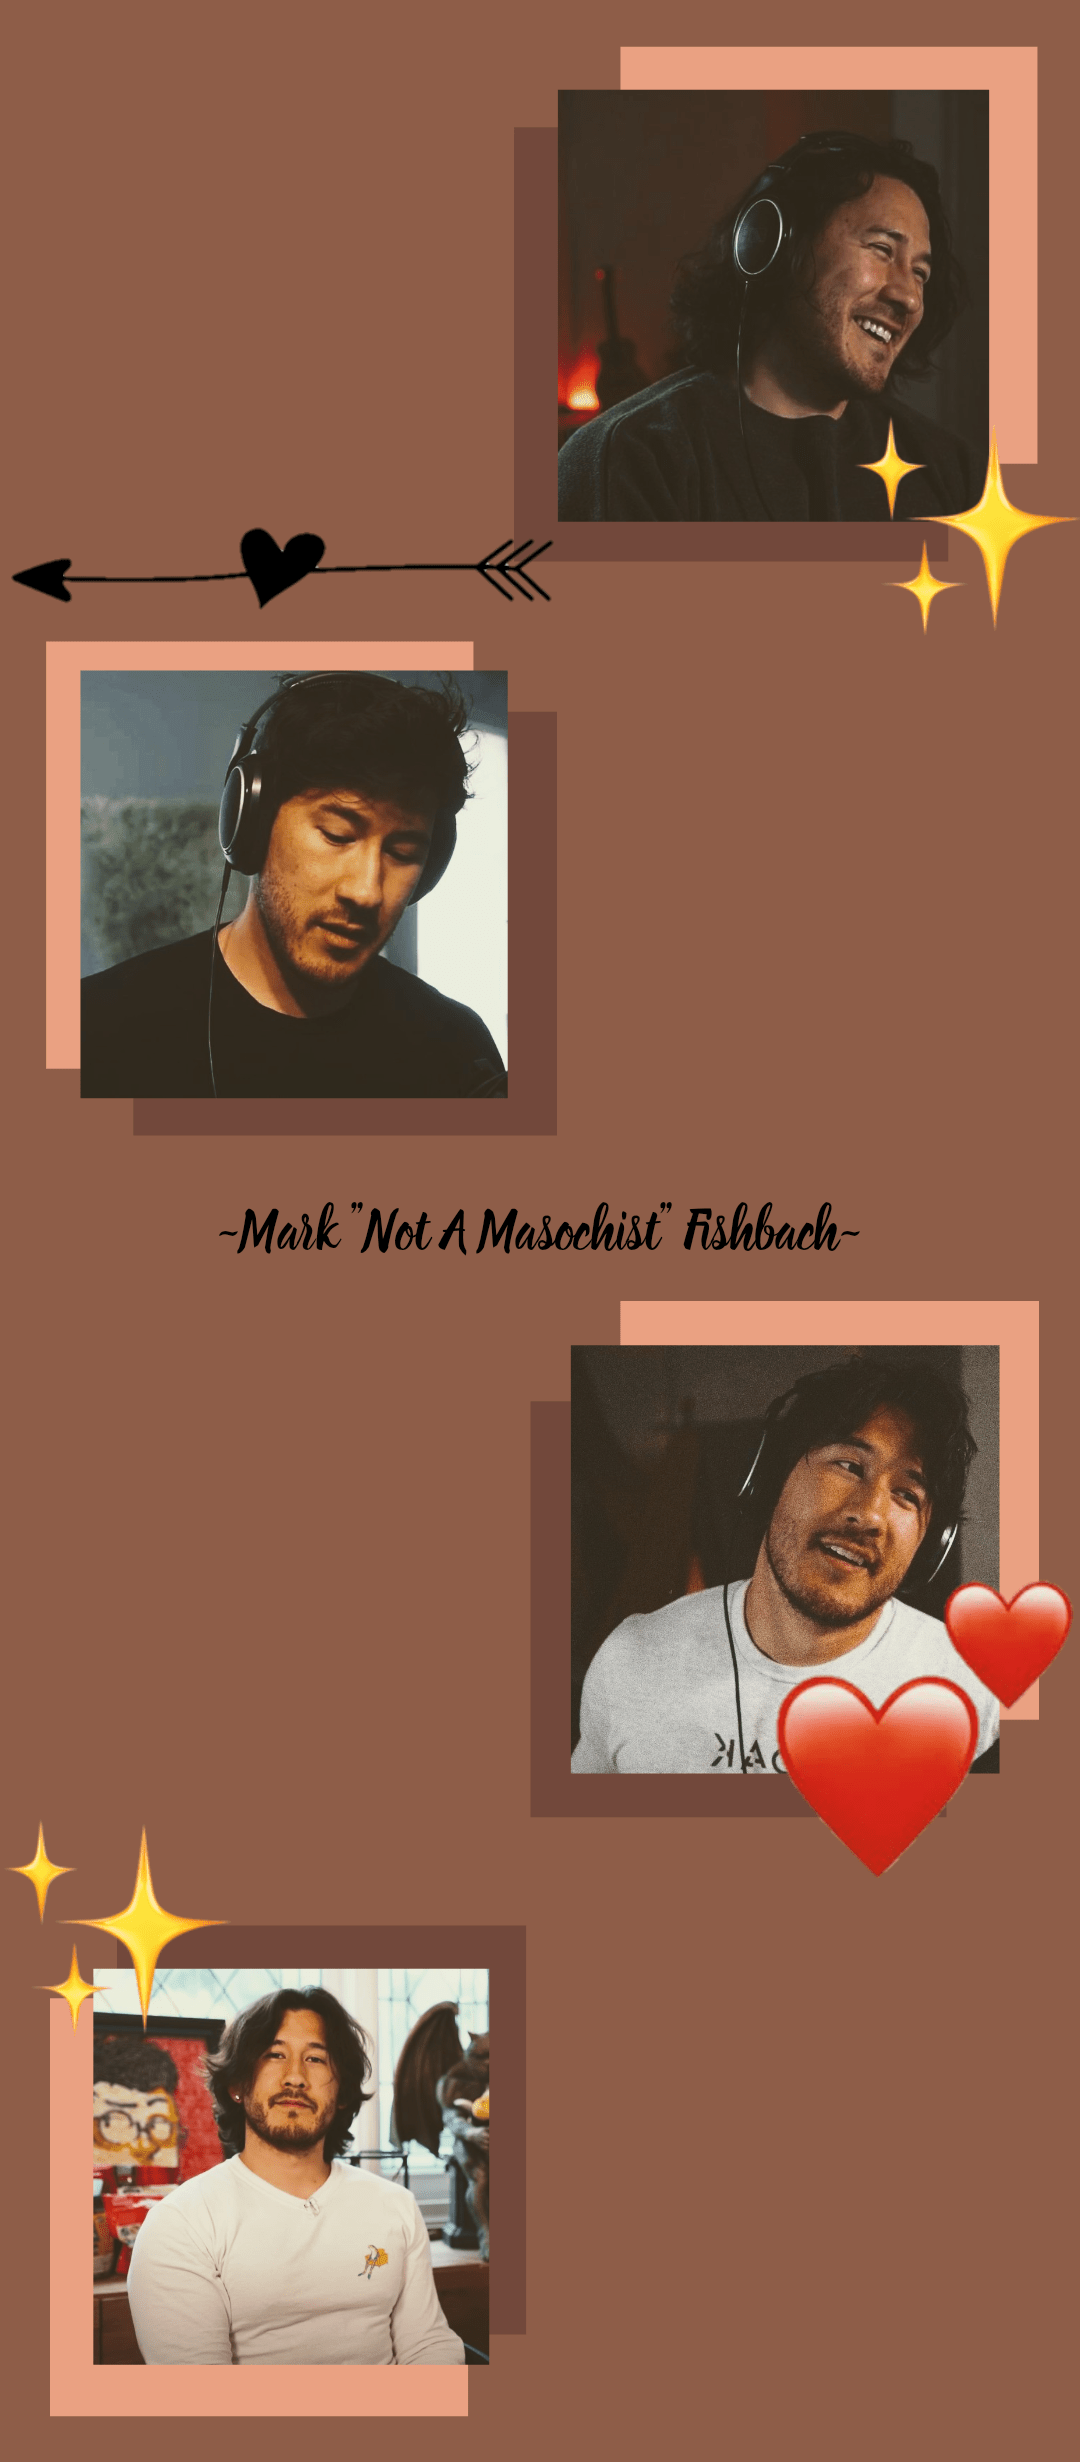 A collage of Mark Fishbach's photos with a brown background - Markiplier